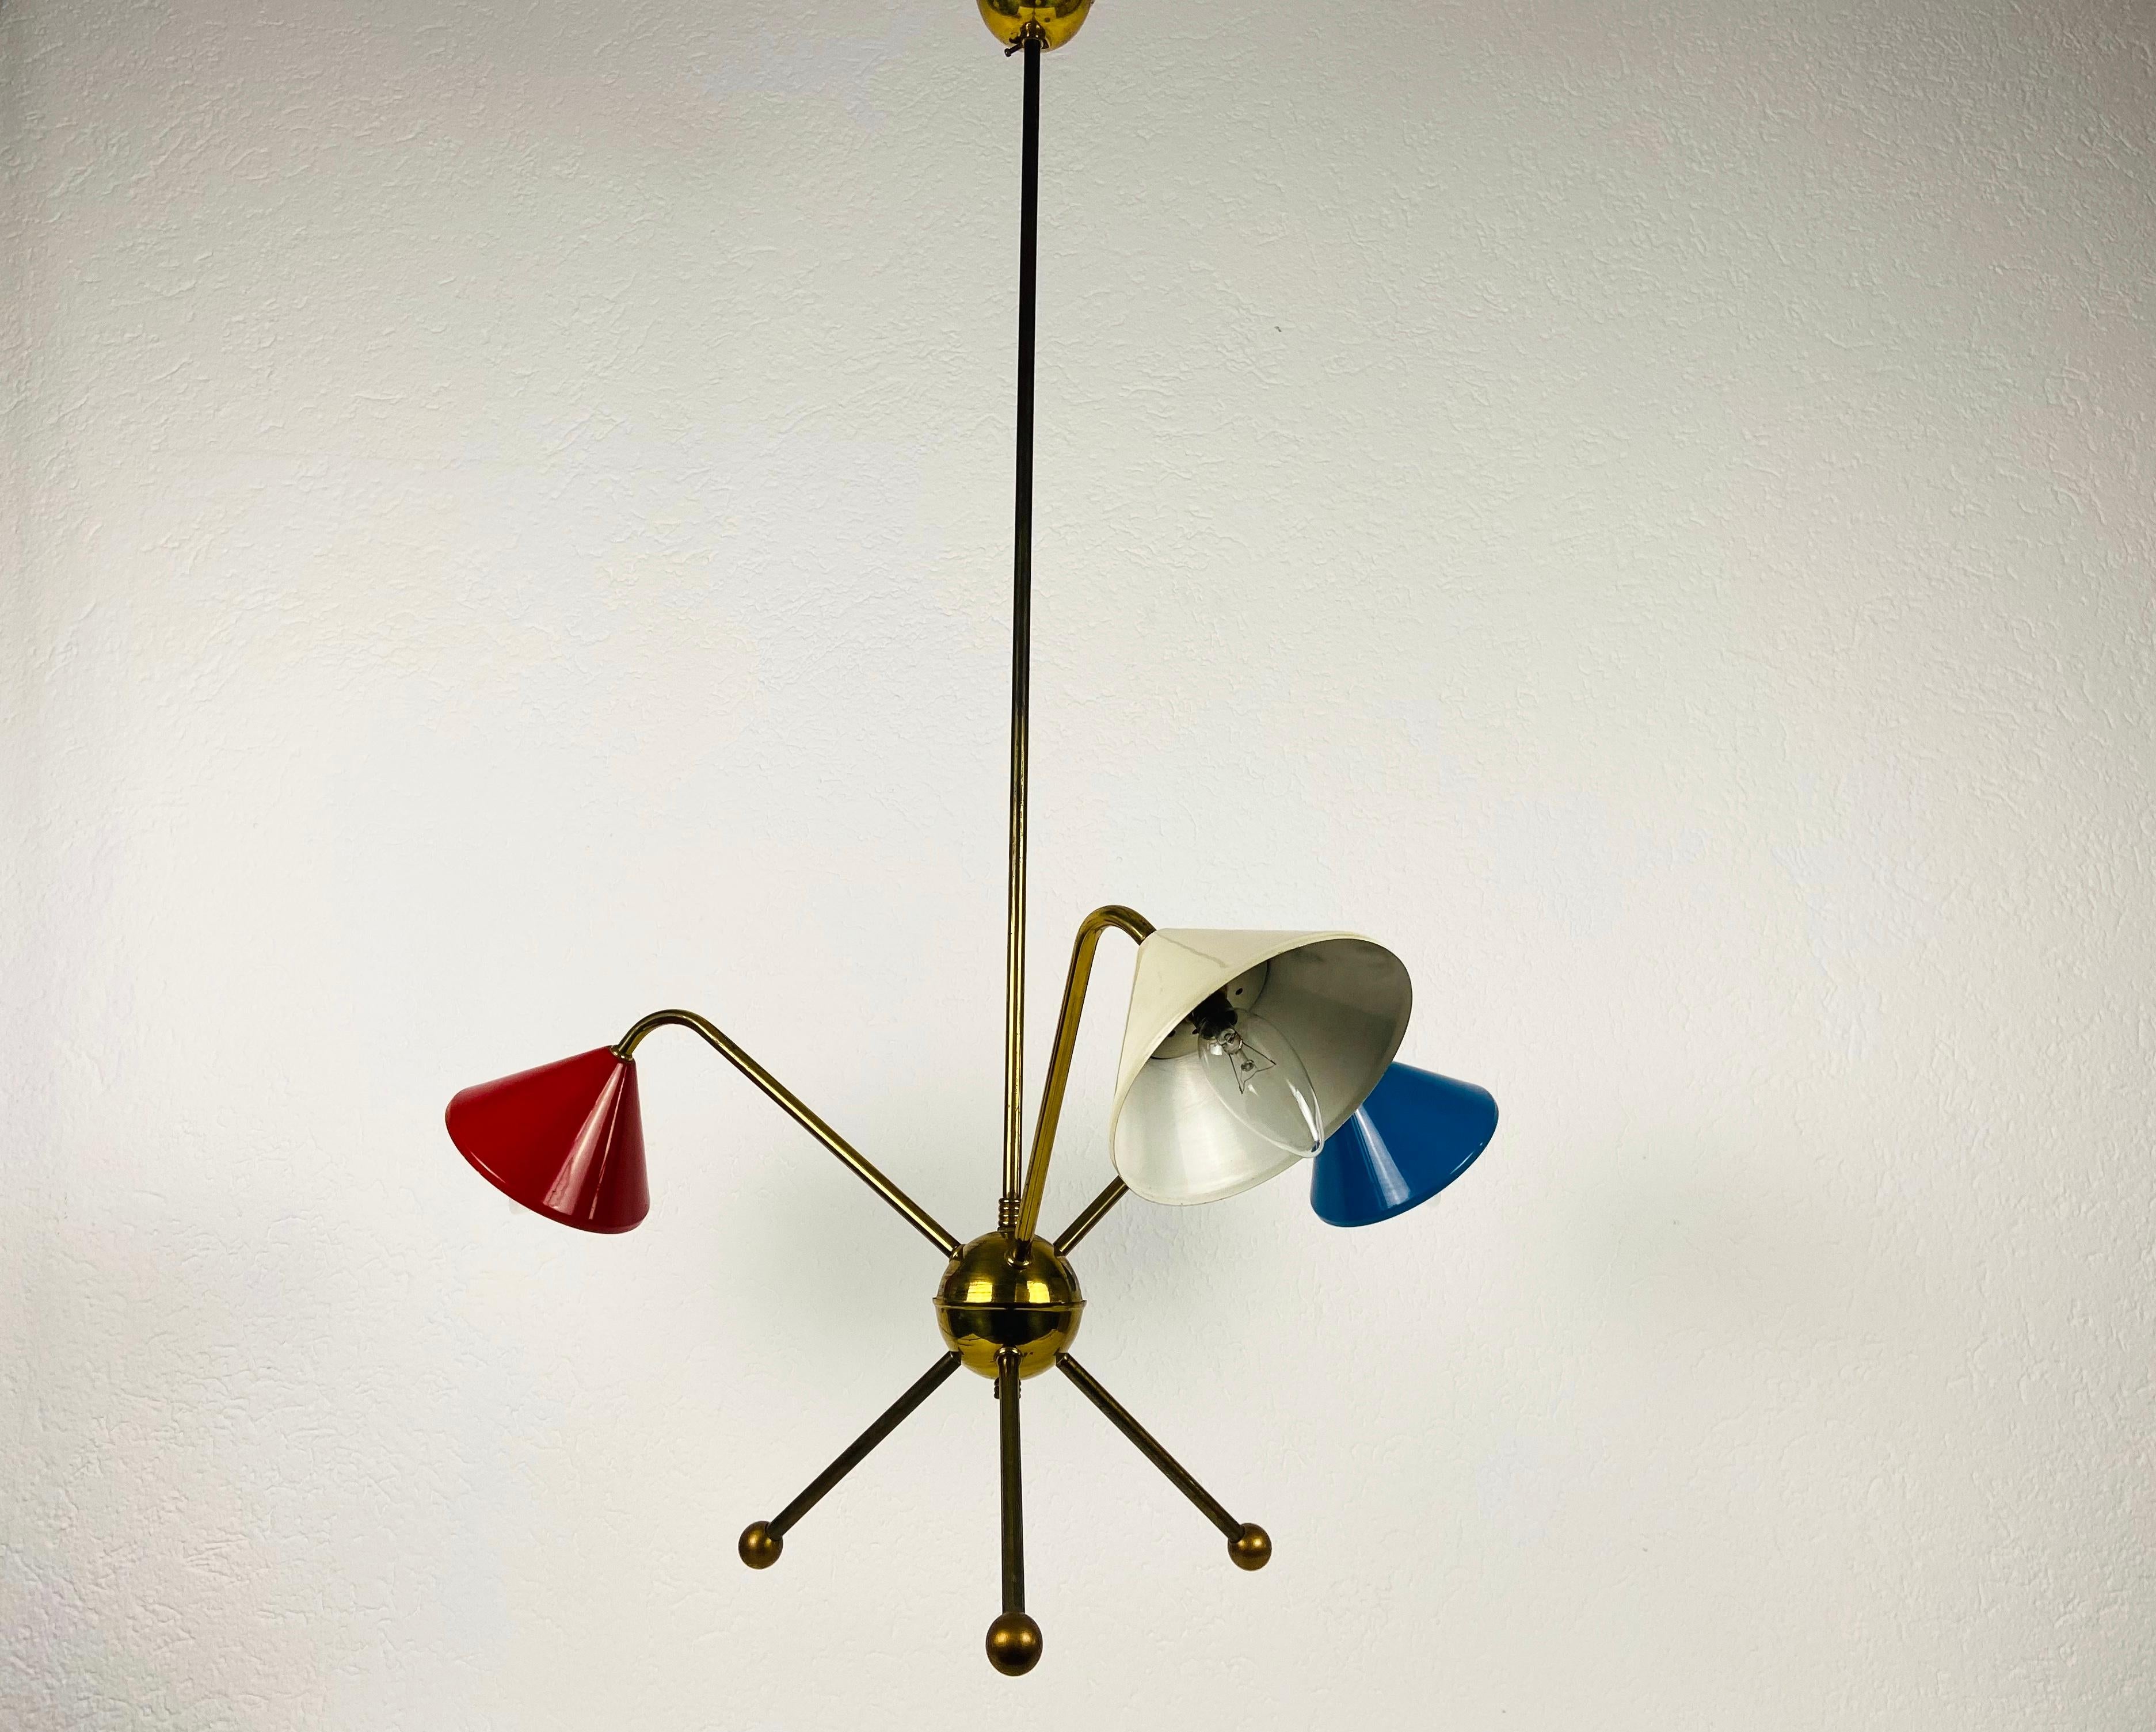 A Sputnik chandelier made in Italy in the 1950s and attributed to Arredoluce. It is fascinating with its three brass arms, each of it with an E14 light bulb. 

The light requires 3 E14 light bulbs. Good vintage condition. Works with both 120/220